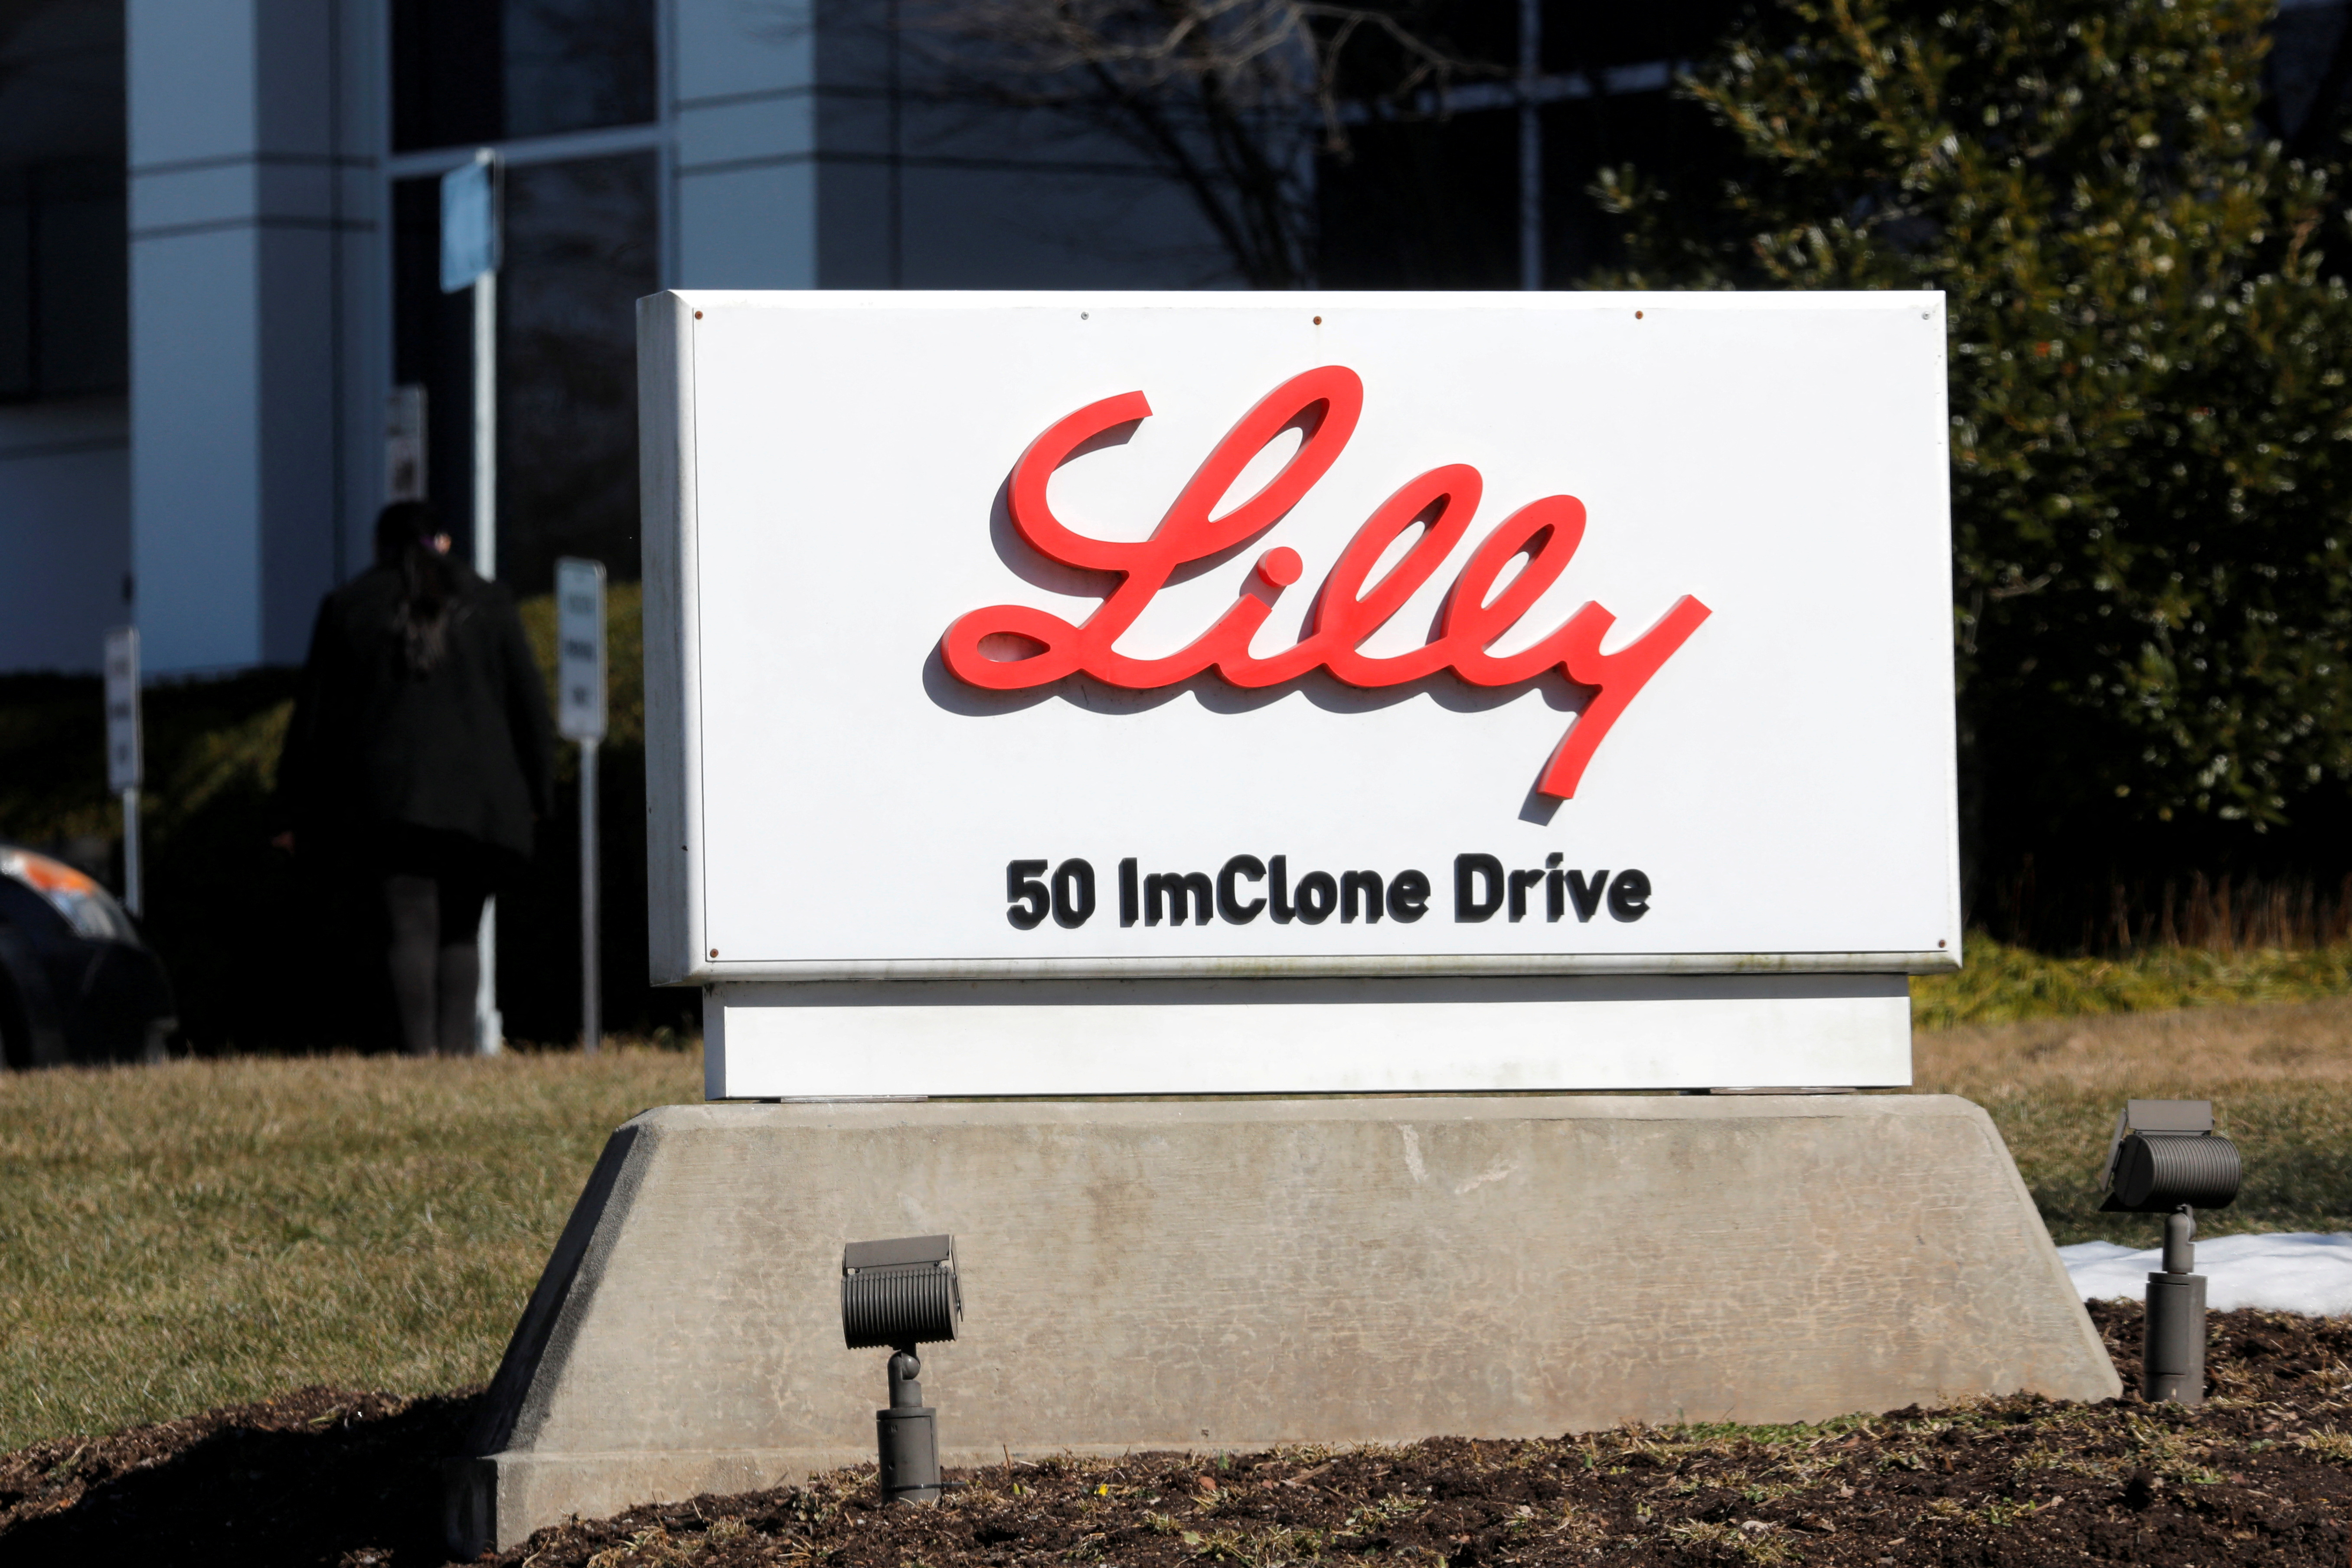 Lilly intends to build a $2.5 billion factory in Germany as demand for obesity drugs rises